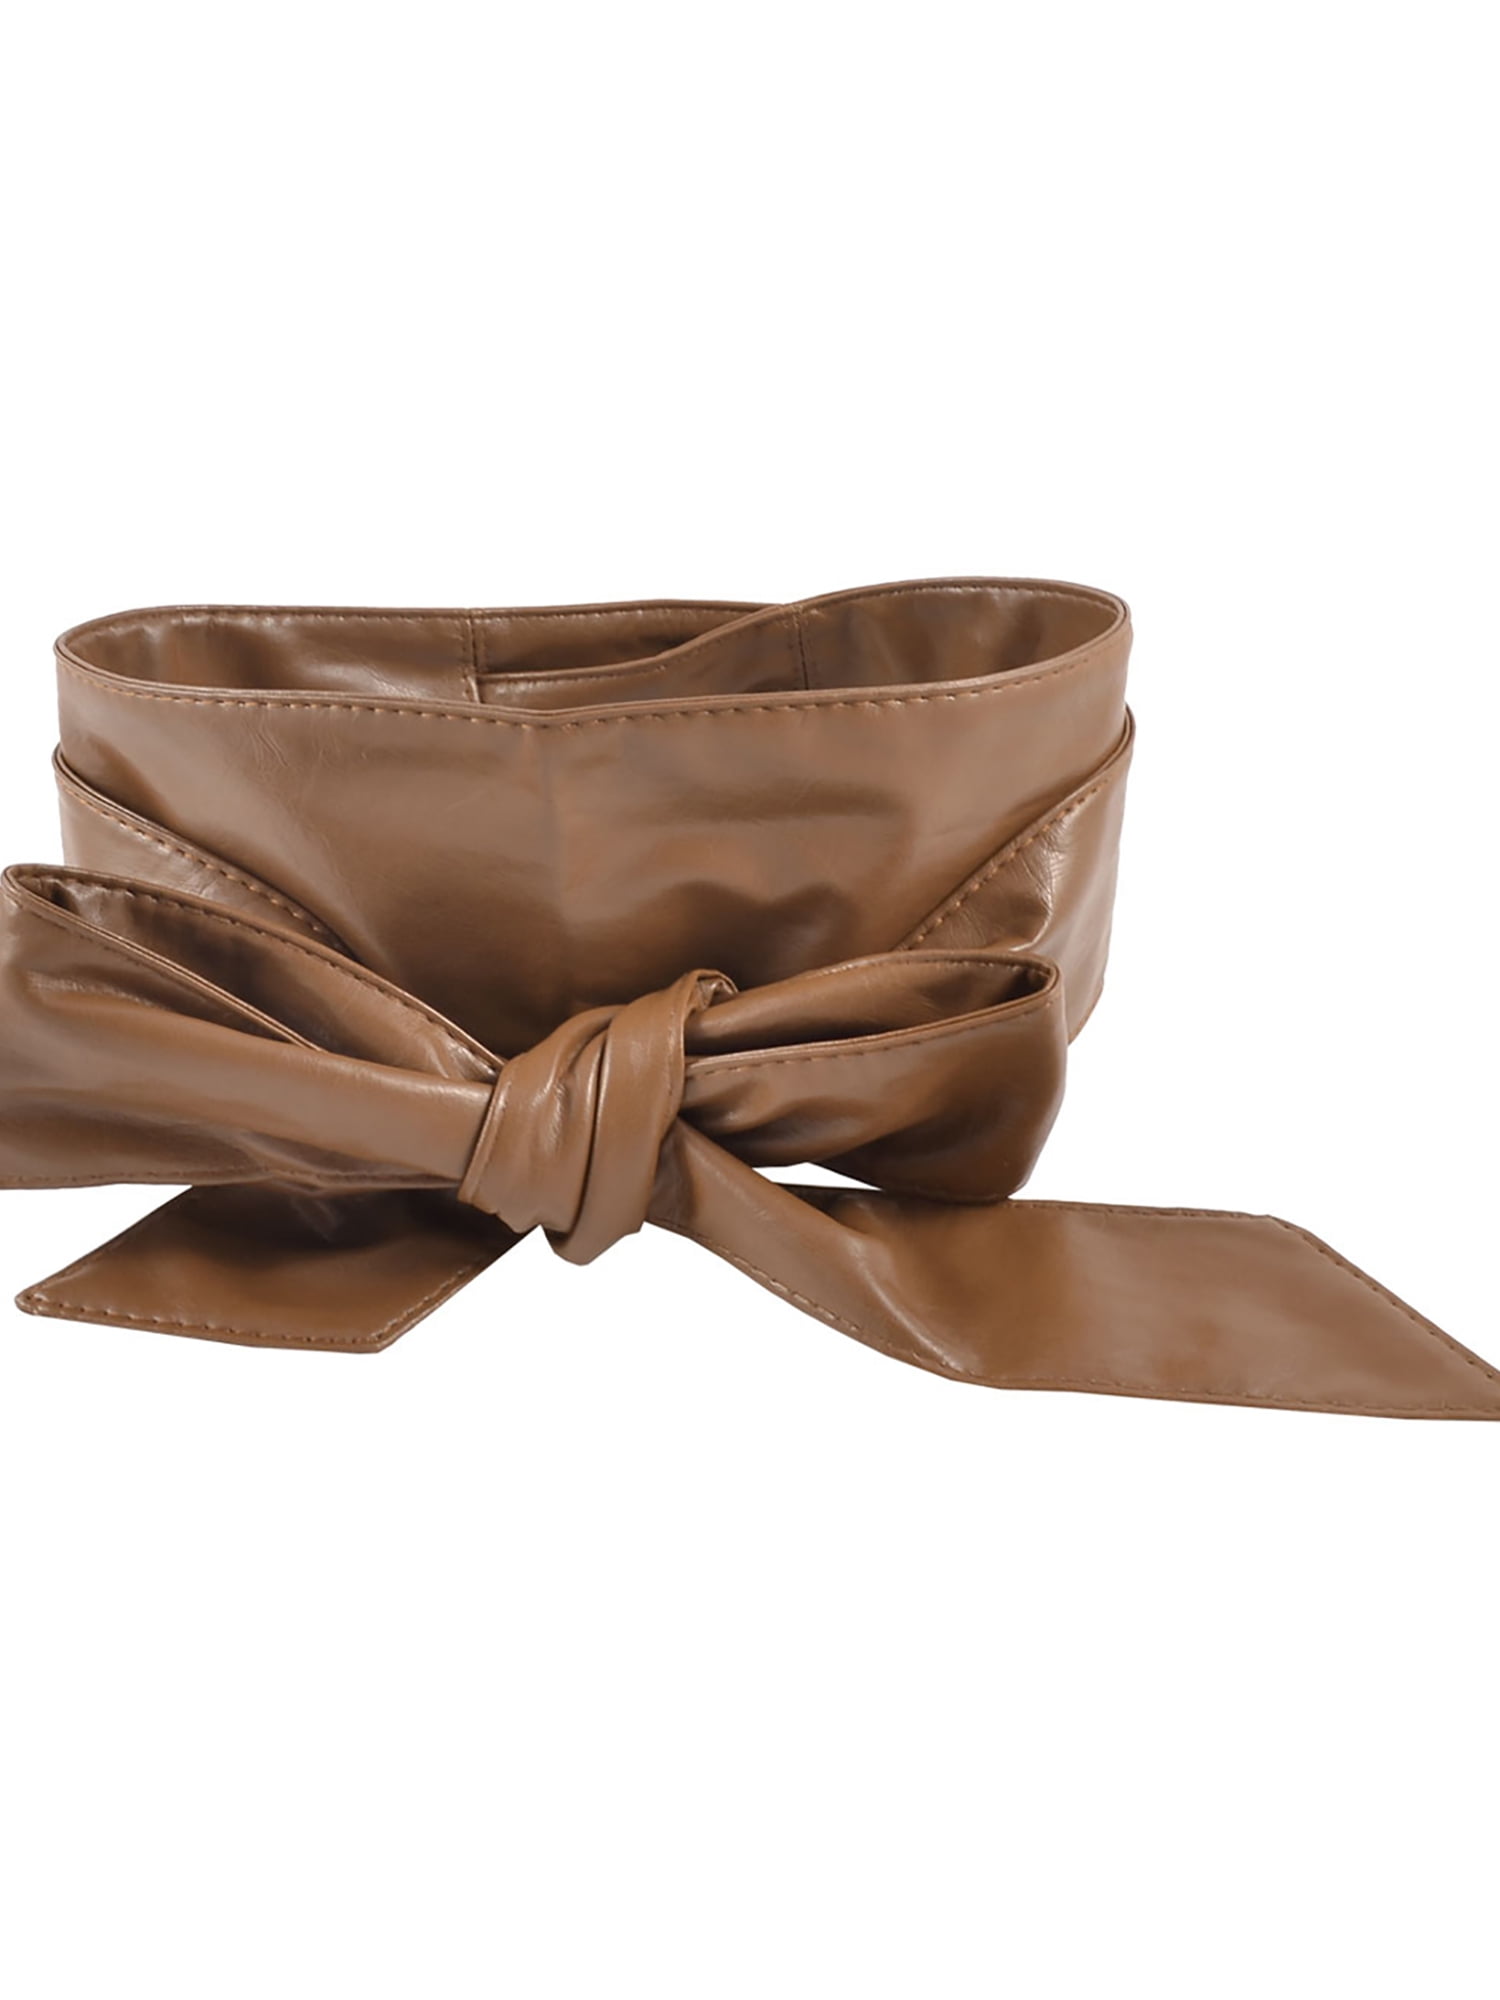 Dark brown leather obi belt for women dress - Wide wrap leather women's  belt with brown strap closed with pin.